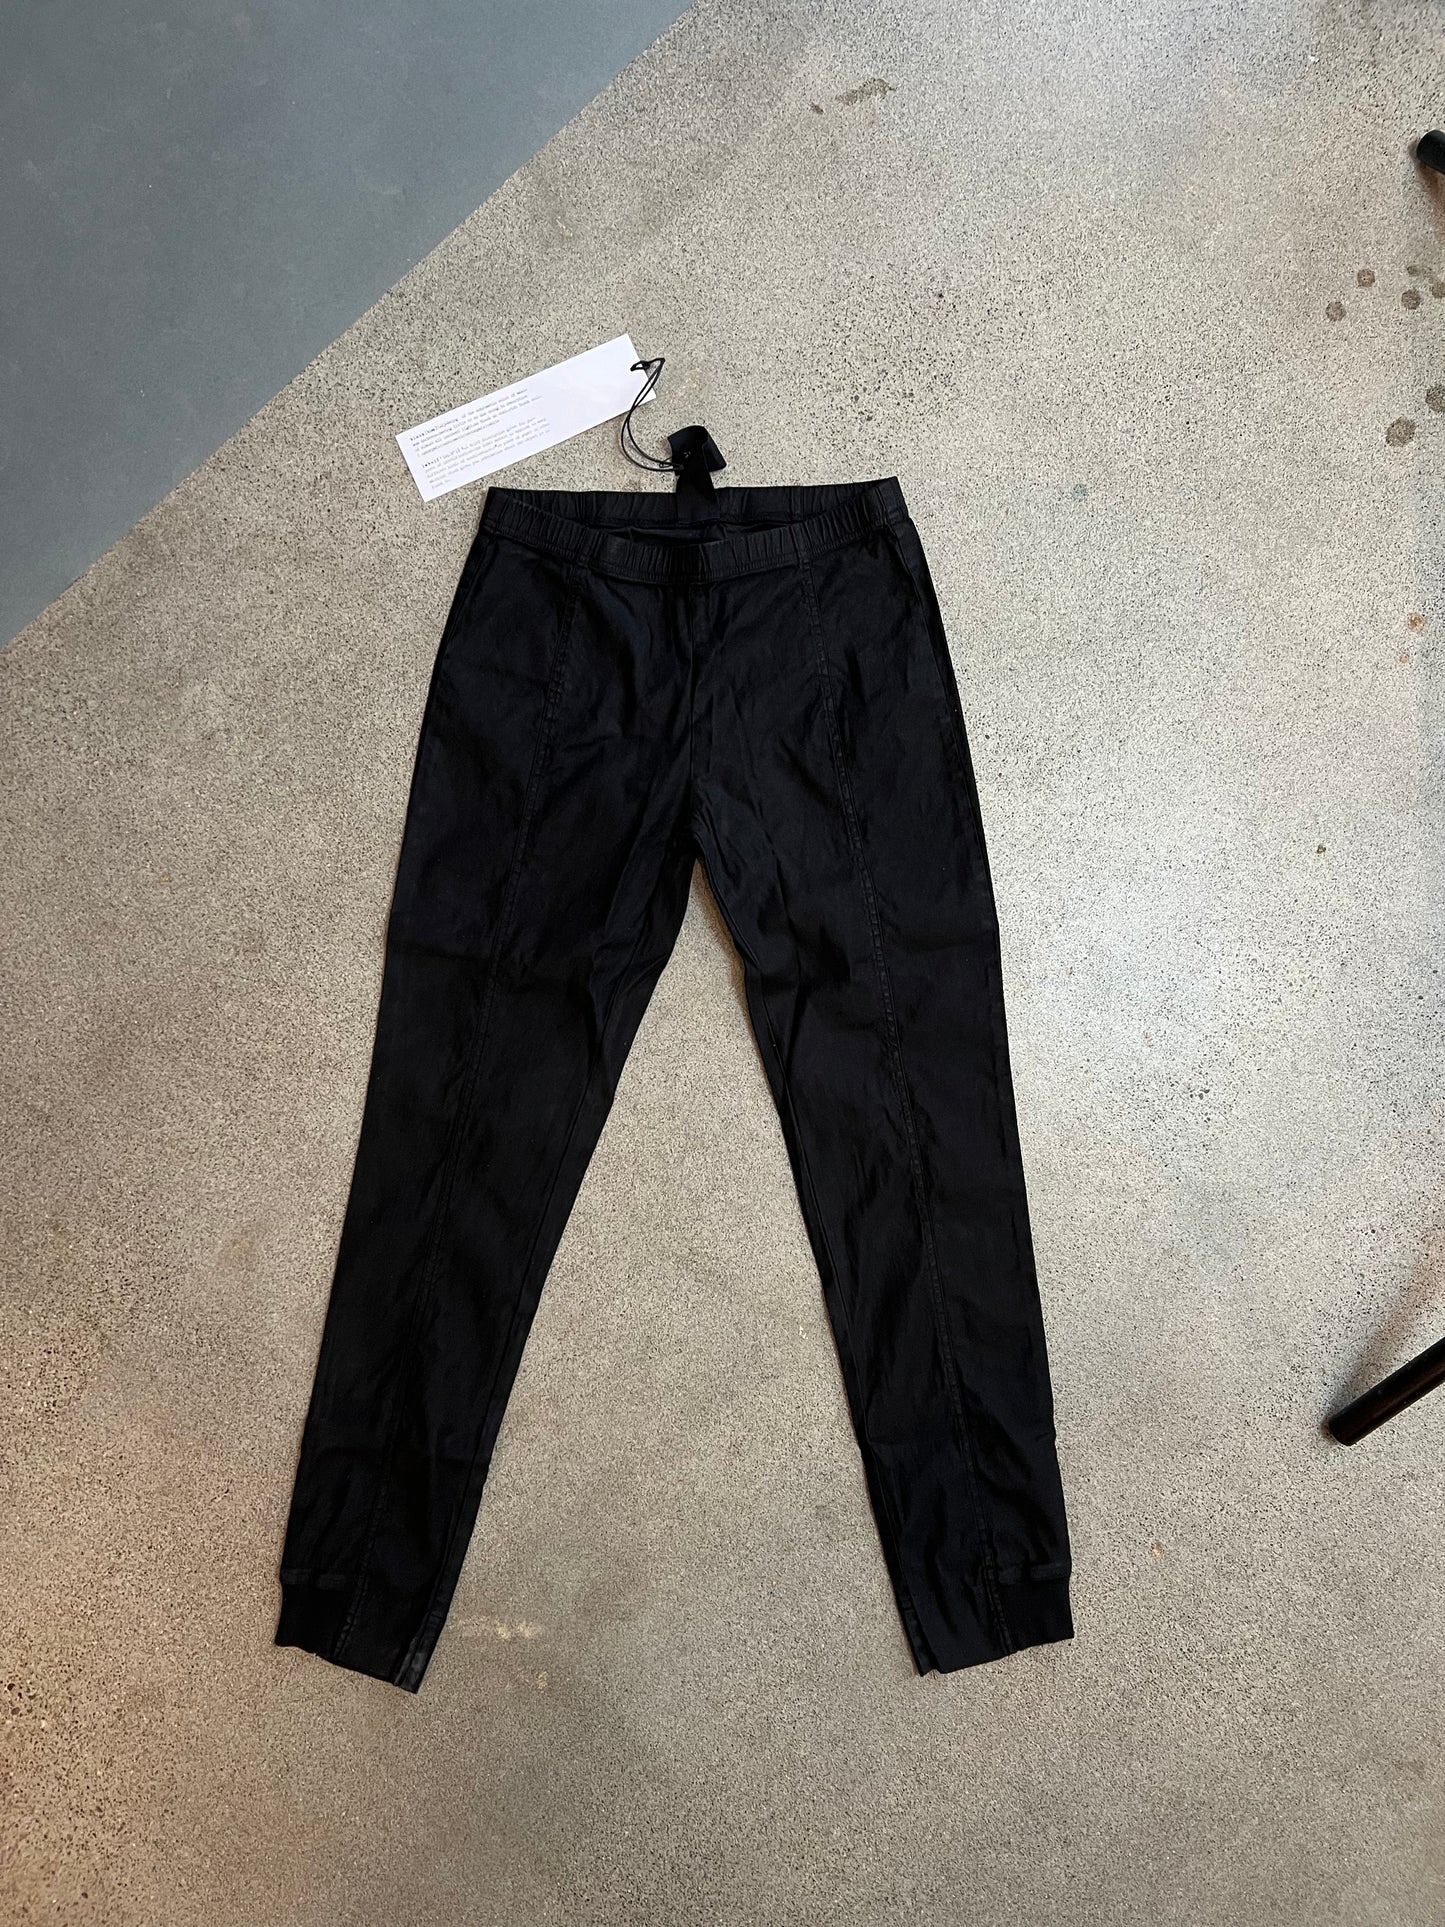 Rundholz Black Label - Pull-on  Trim Trousers in Black or White